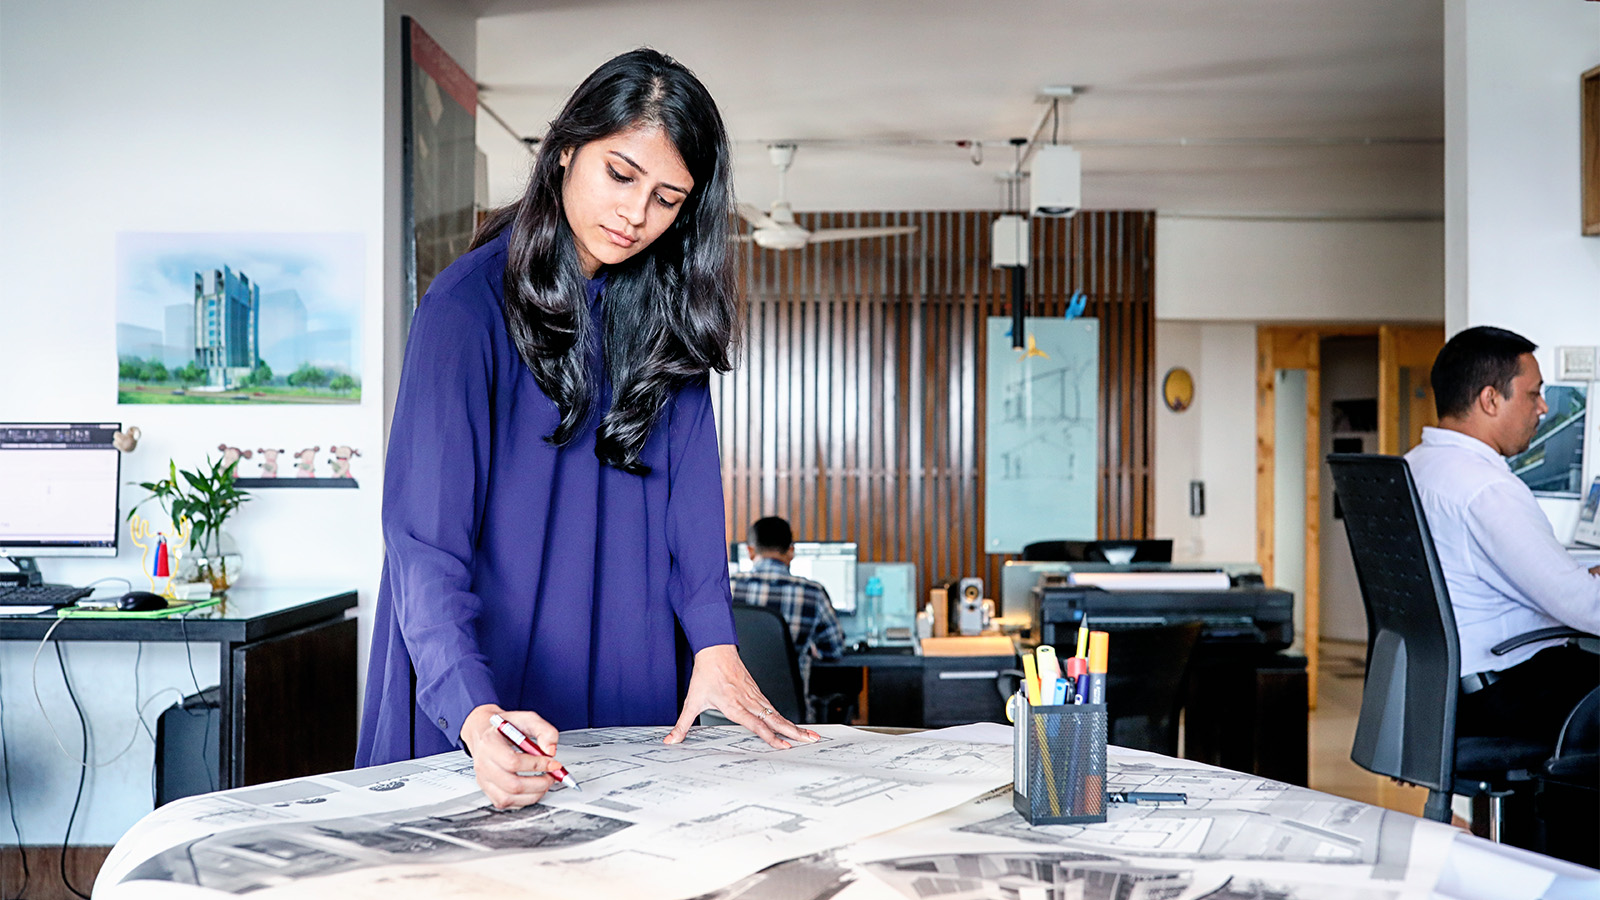 Salma Hossain is a young architect who has been working for an architectural firm in Dhaka for last few years.